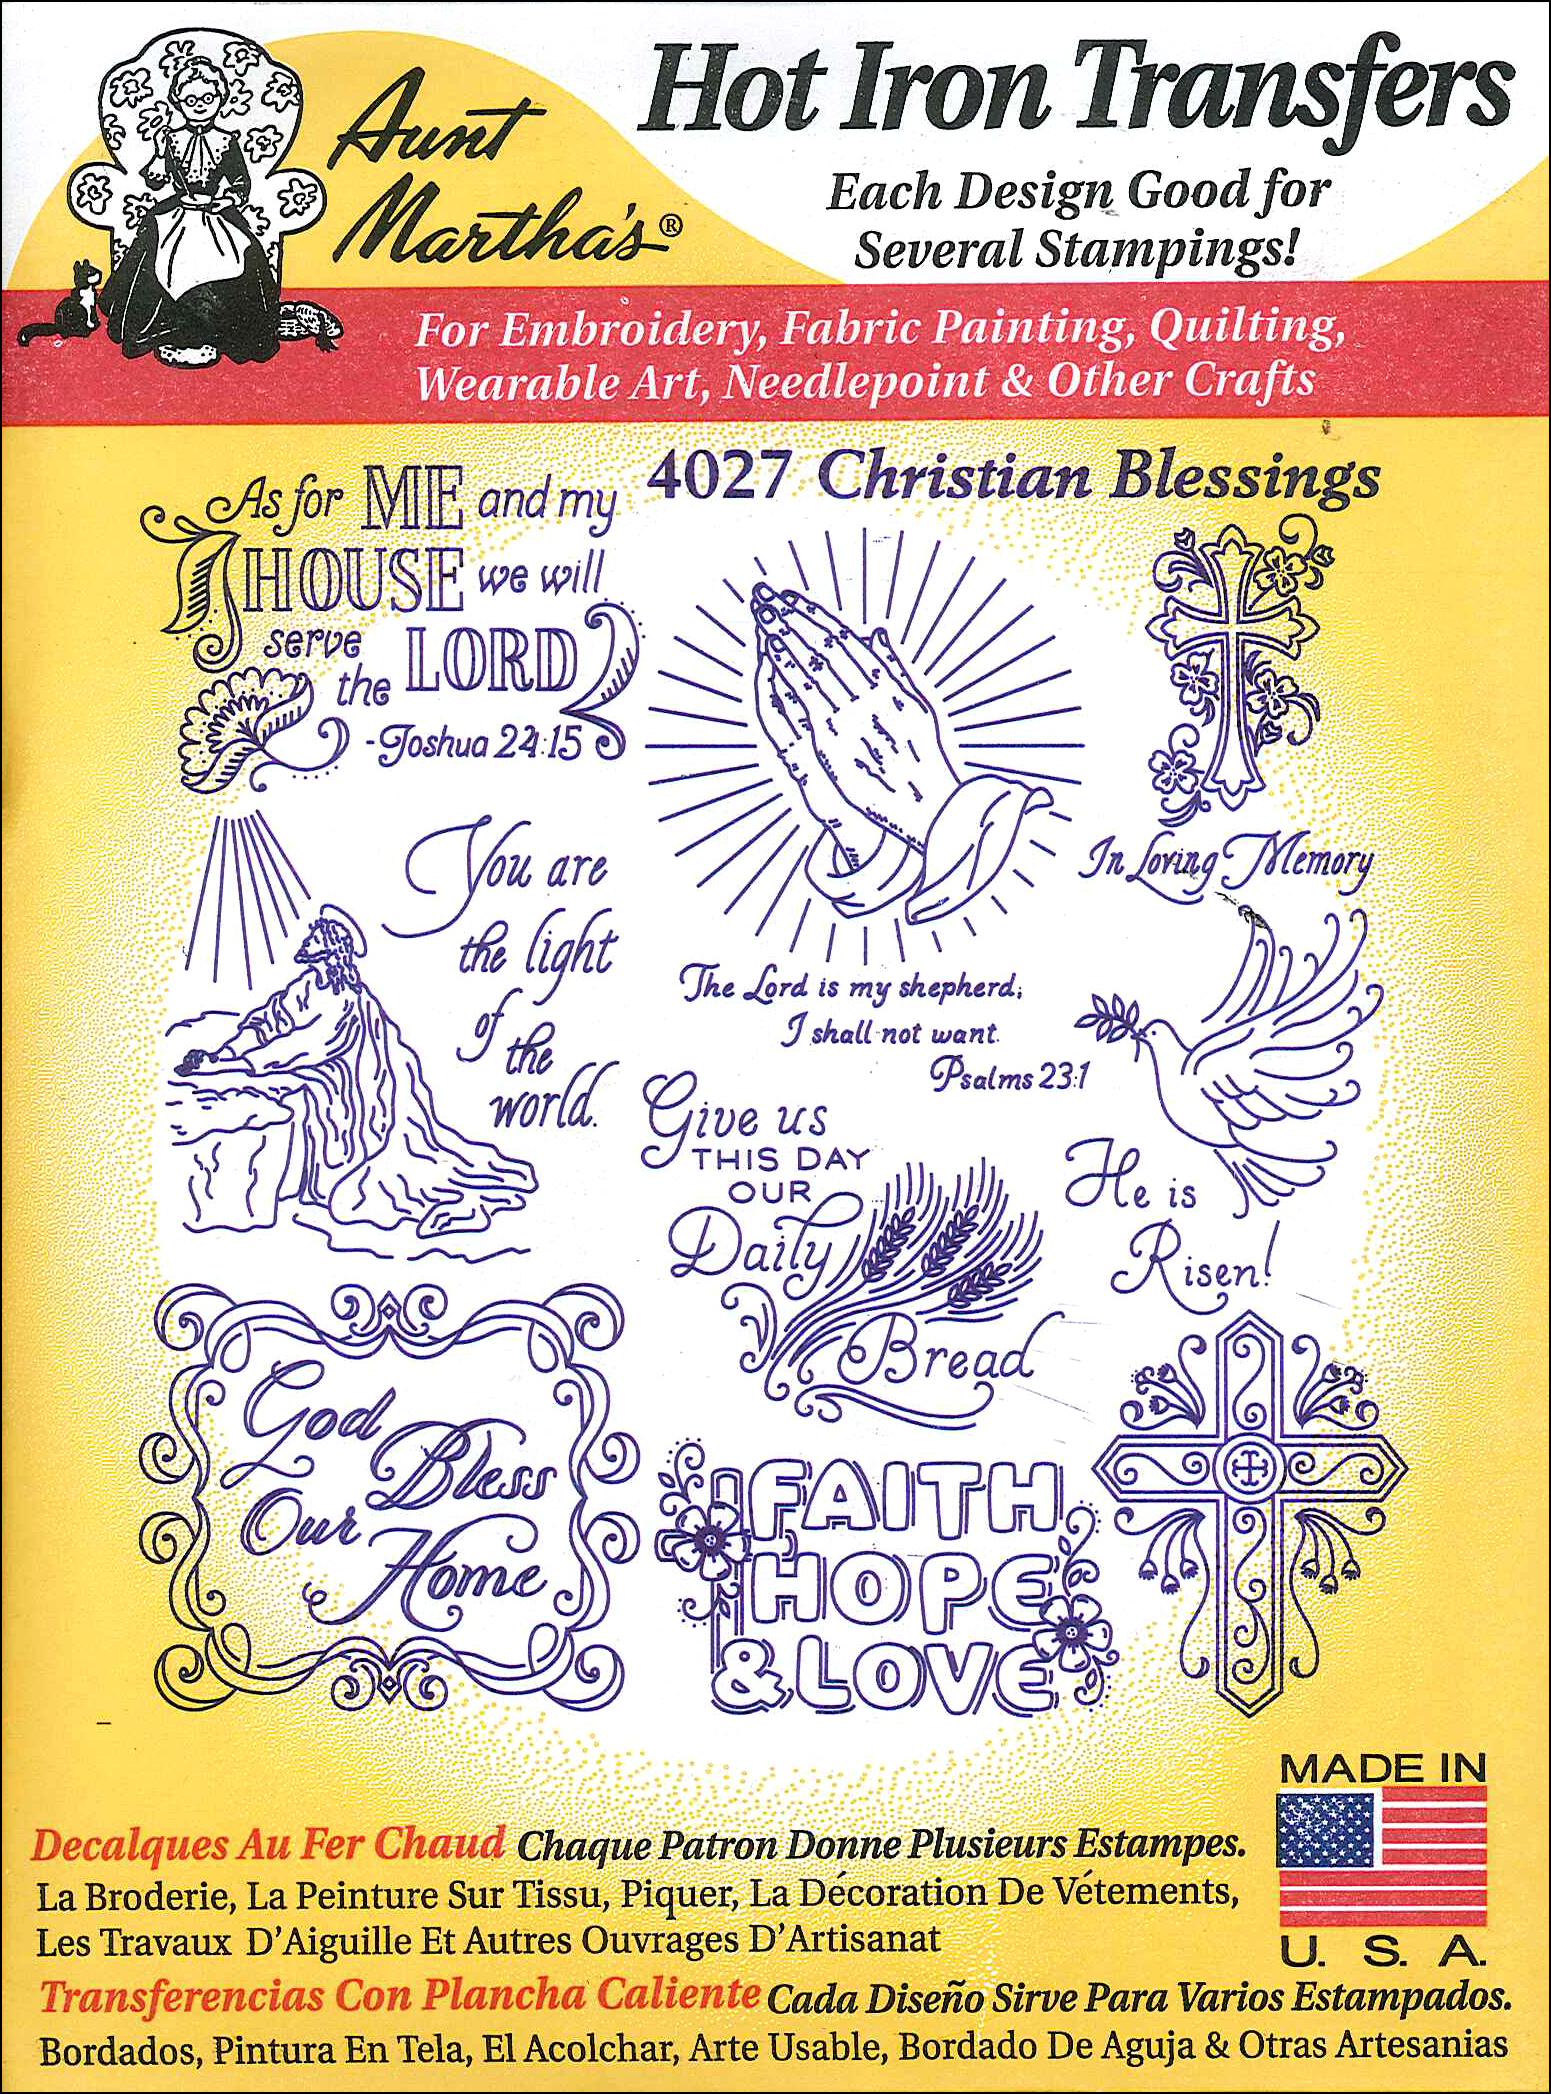 Iron On Transfer Patterns For Embroidery Aunt Marthas Hot Iron Transfers 4027 Christian Blessings 1